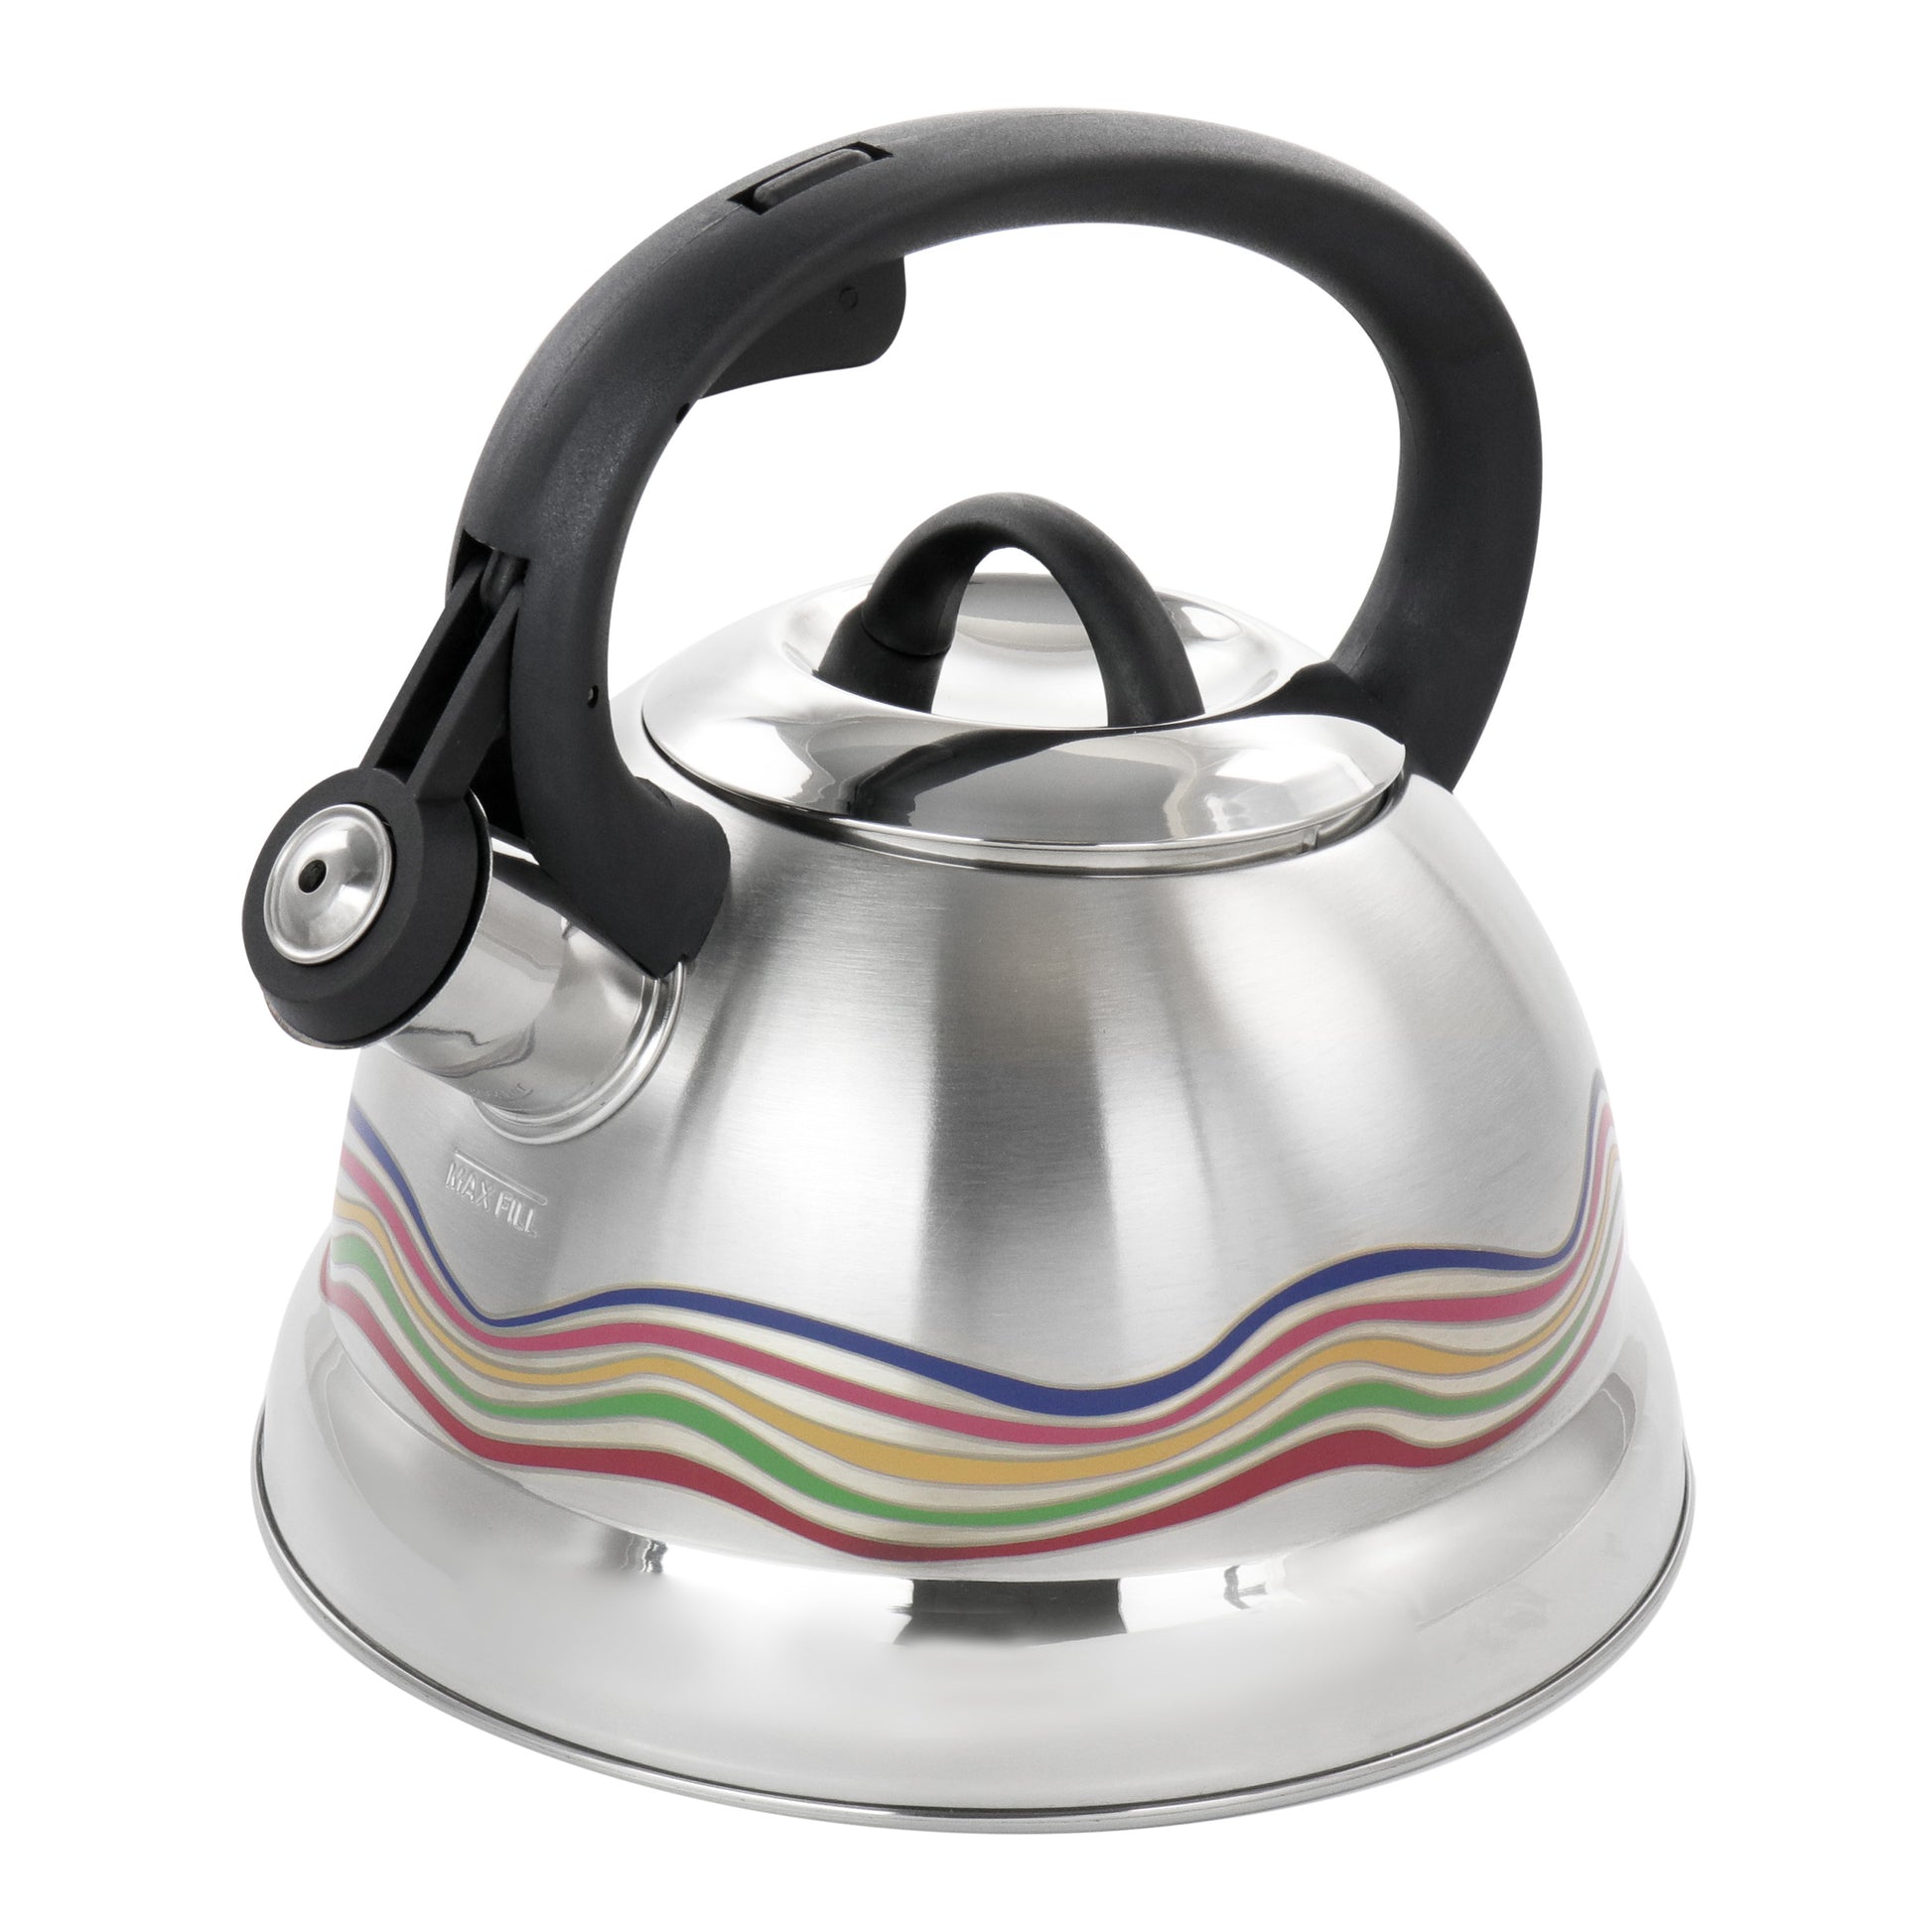 Mr. Coffee Mr. Coffee Cagliari 1.75 Quart Stainless Steel Whistling Tea Kettle with Color Changing Exterior